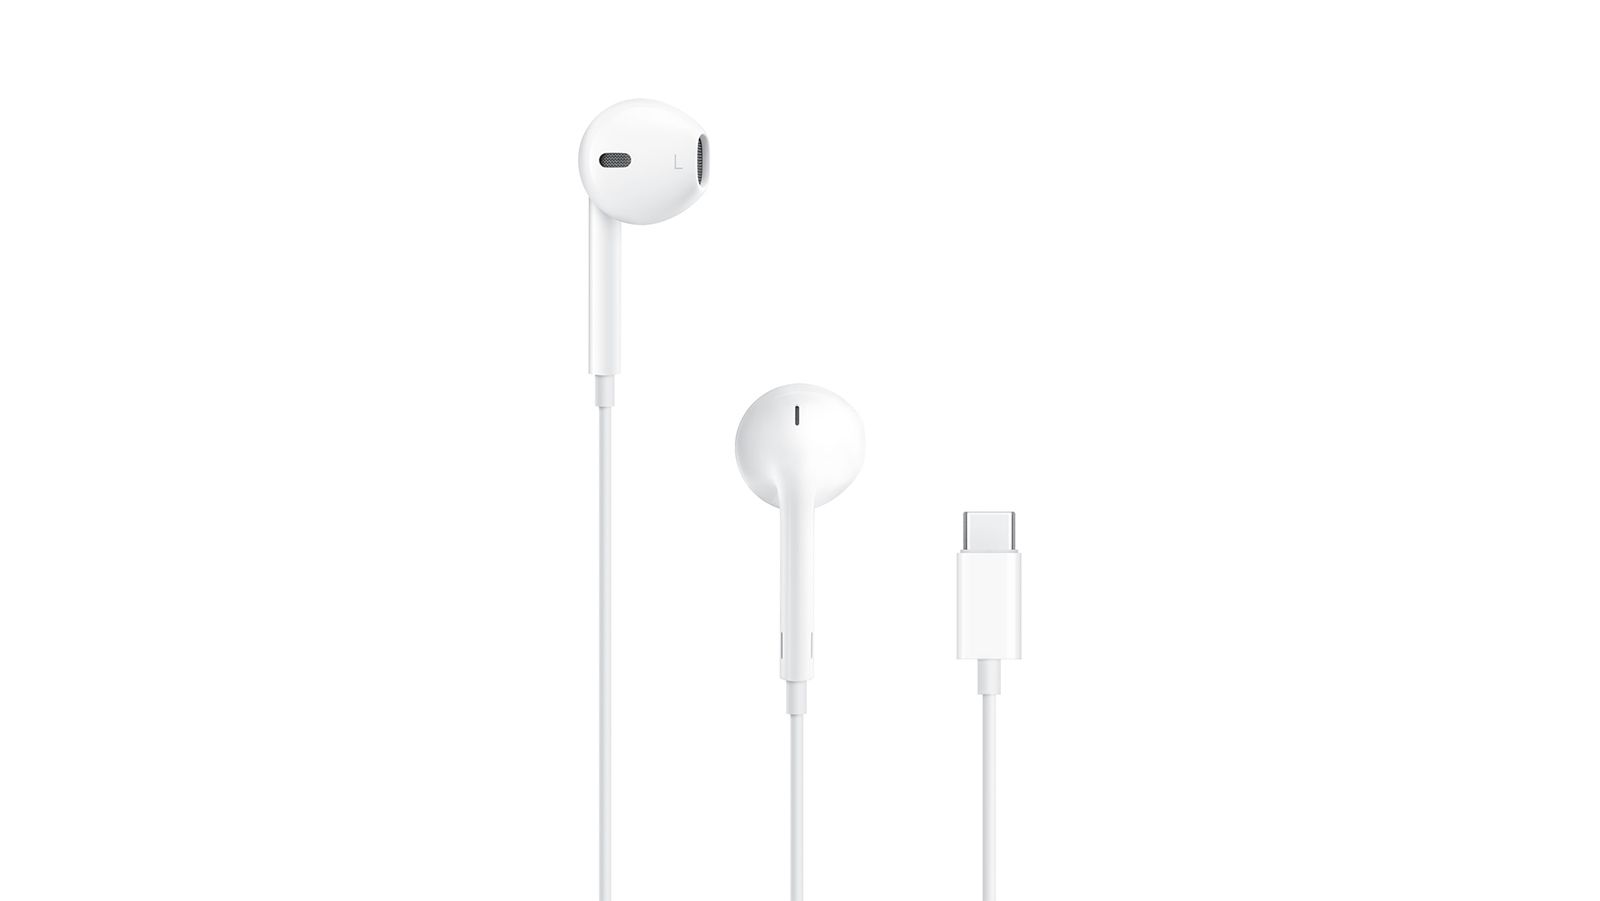 Under $25 scores: Apple's USB-C EarPods are some of the best